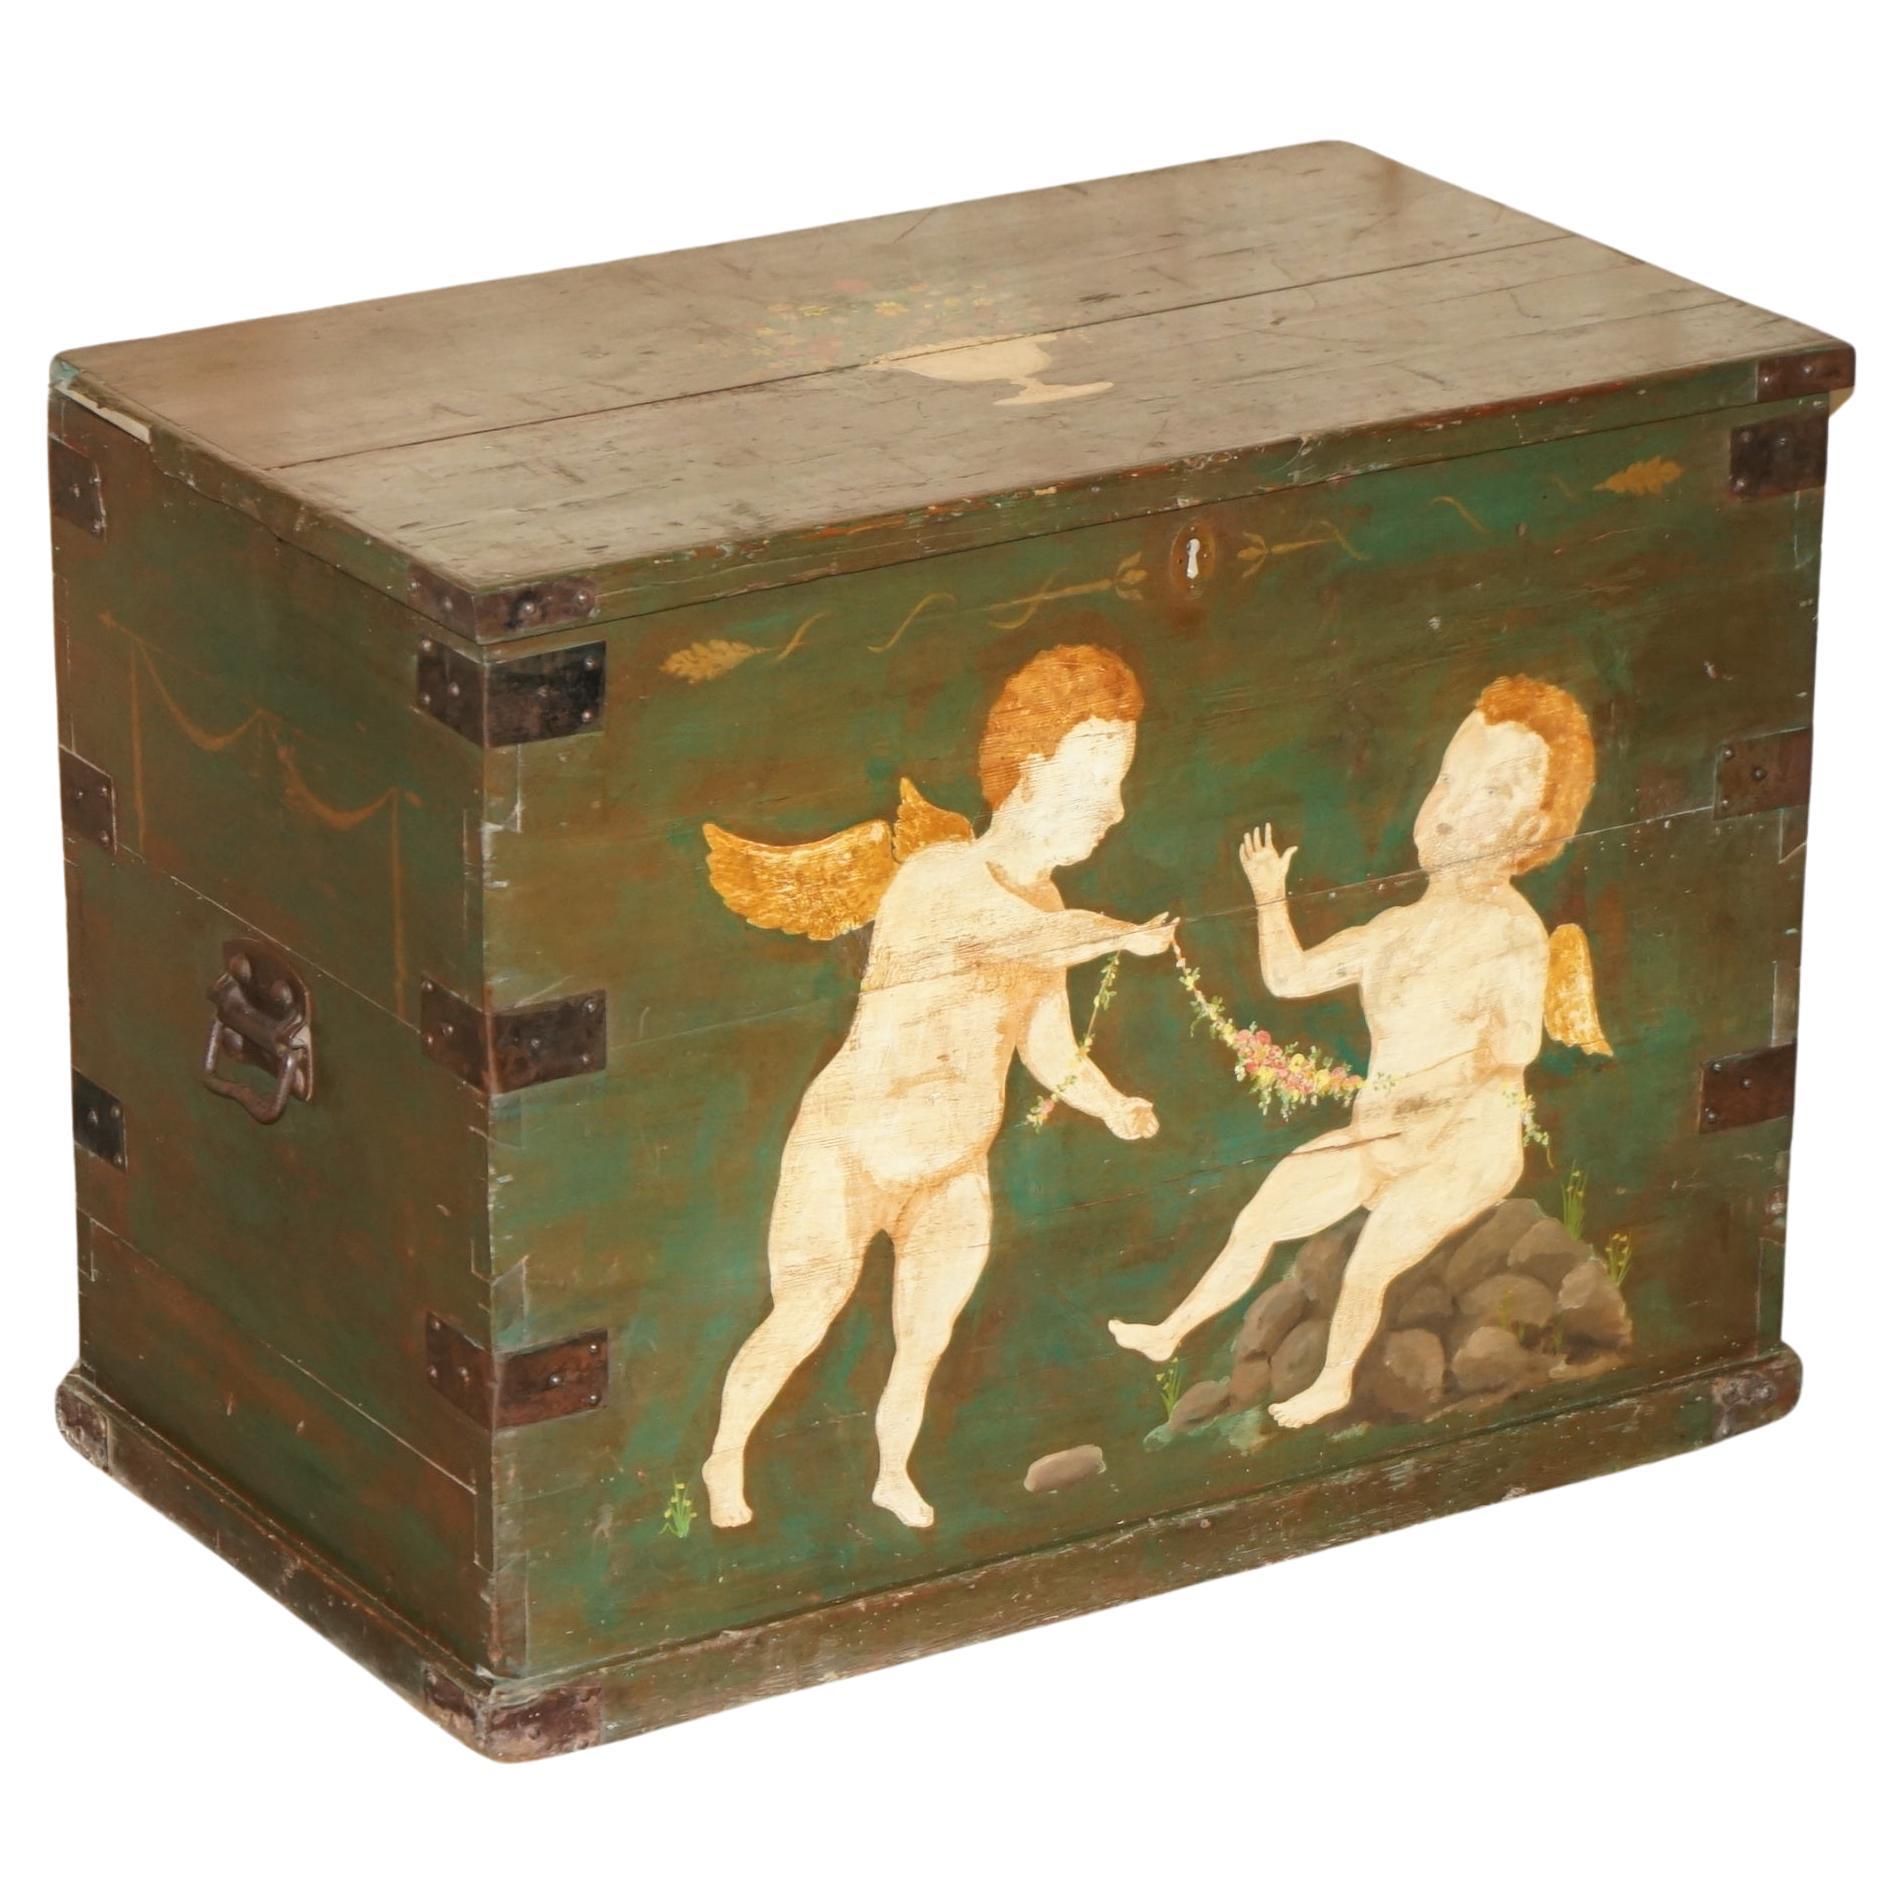 1860 ITALIAN ORIGINAL PAINT EXTRA LARGE STORAGE TRUNK OR CHEST CHERUB PAINTINGs For Sale